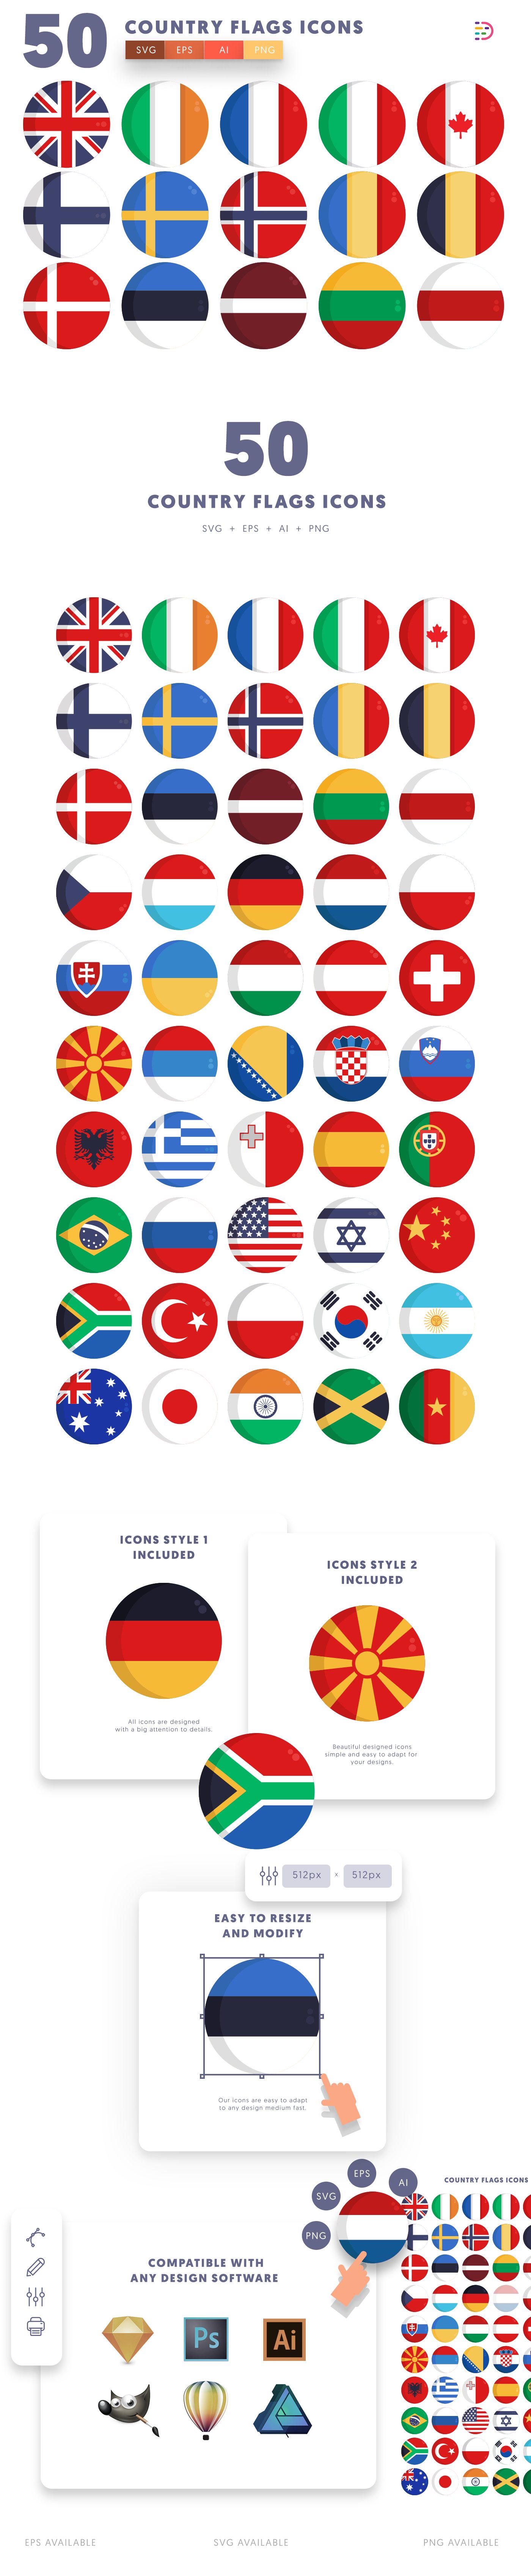 Country Flags icons info graphic